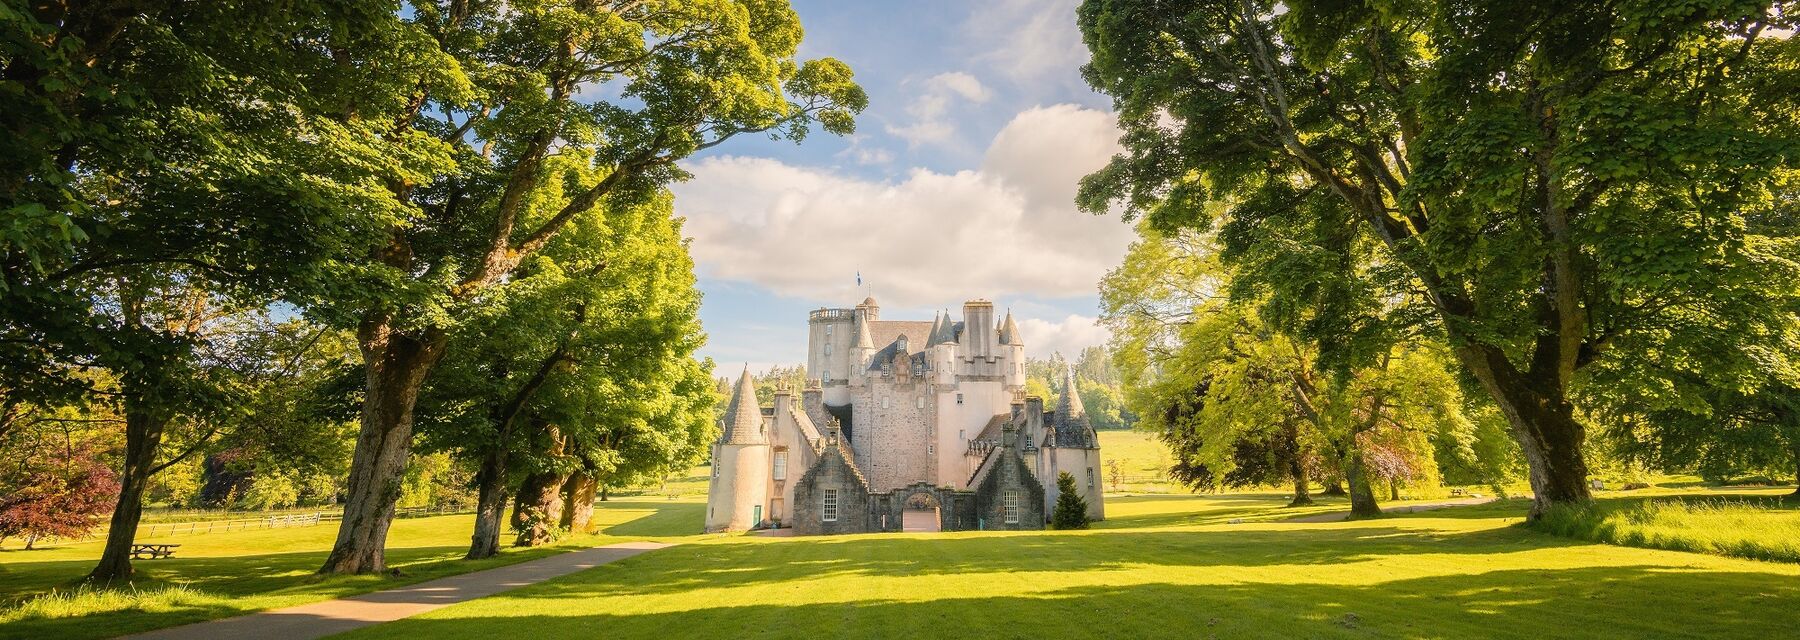 Looking down at Castle Fraser on a sunny day from the surrounding parkland. Tall beech trees run either side of a grass avenue towards the castle.